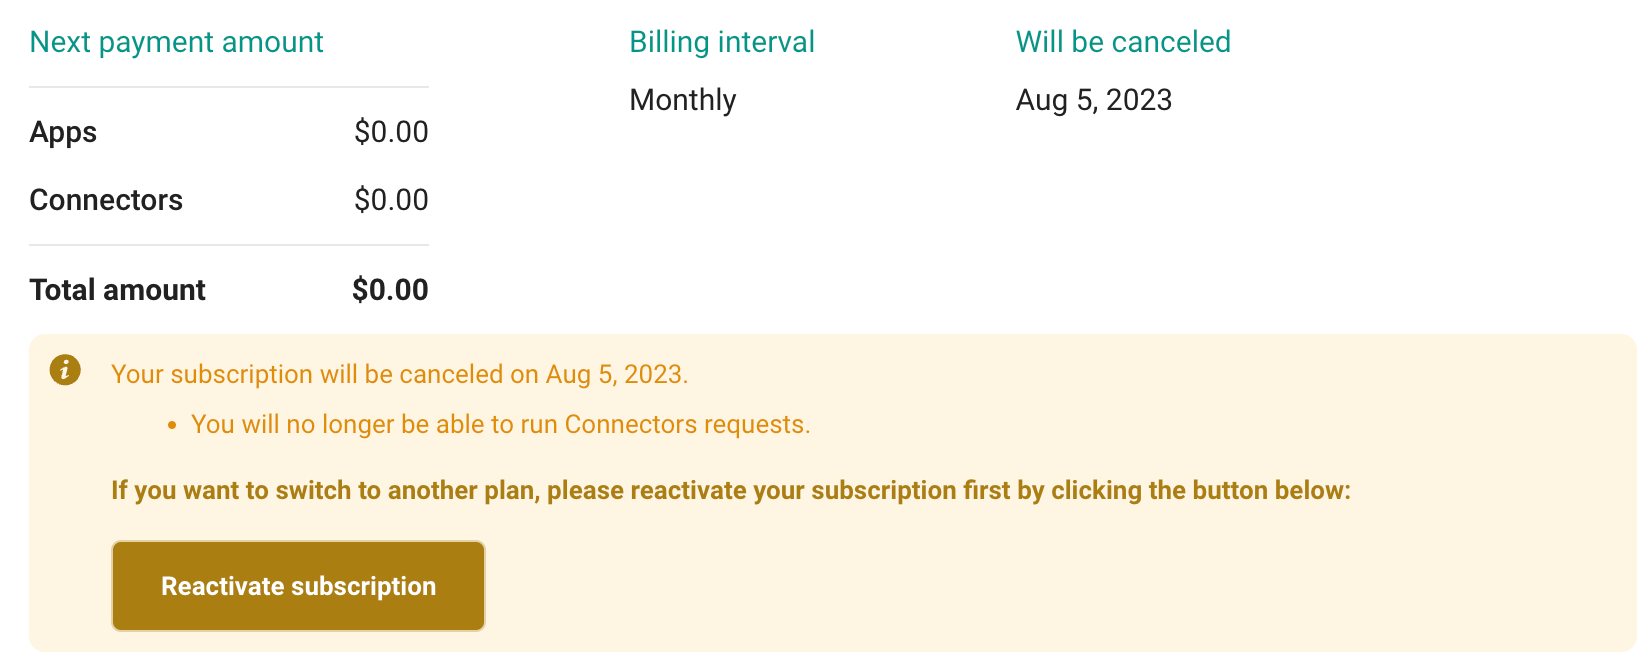 Click Cancel downgrade on the billing page